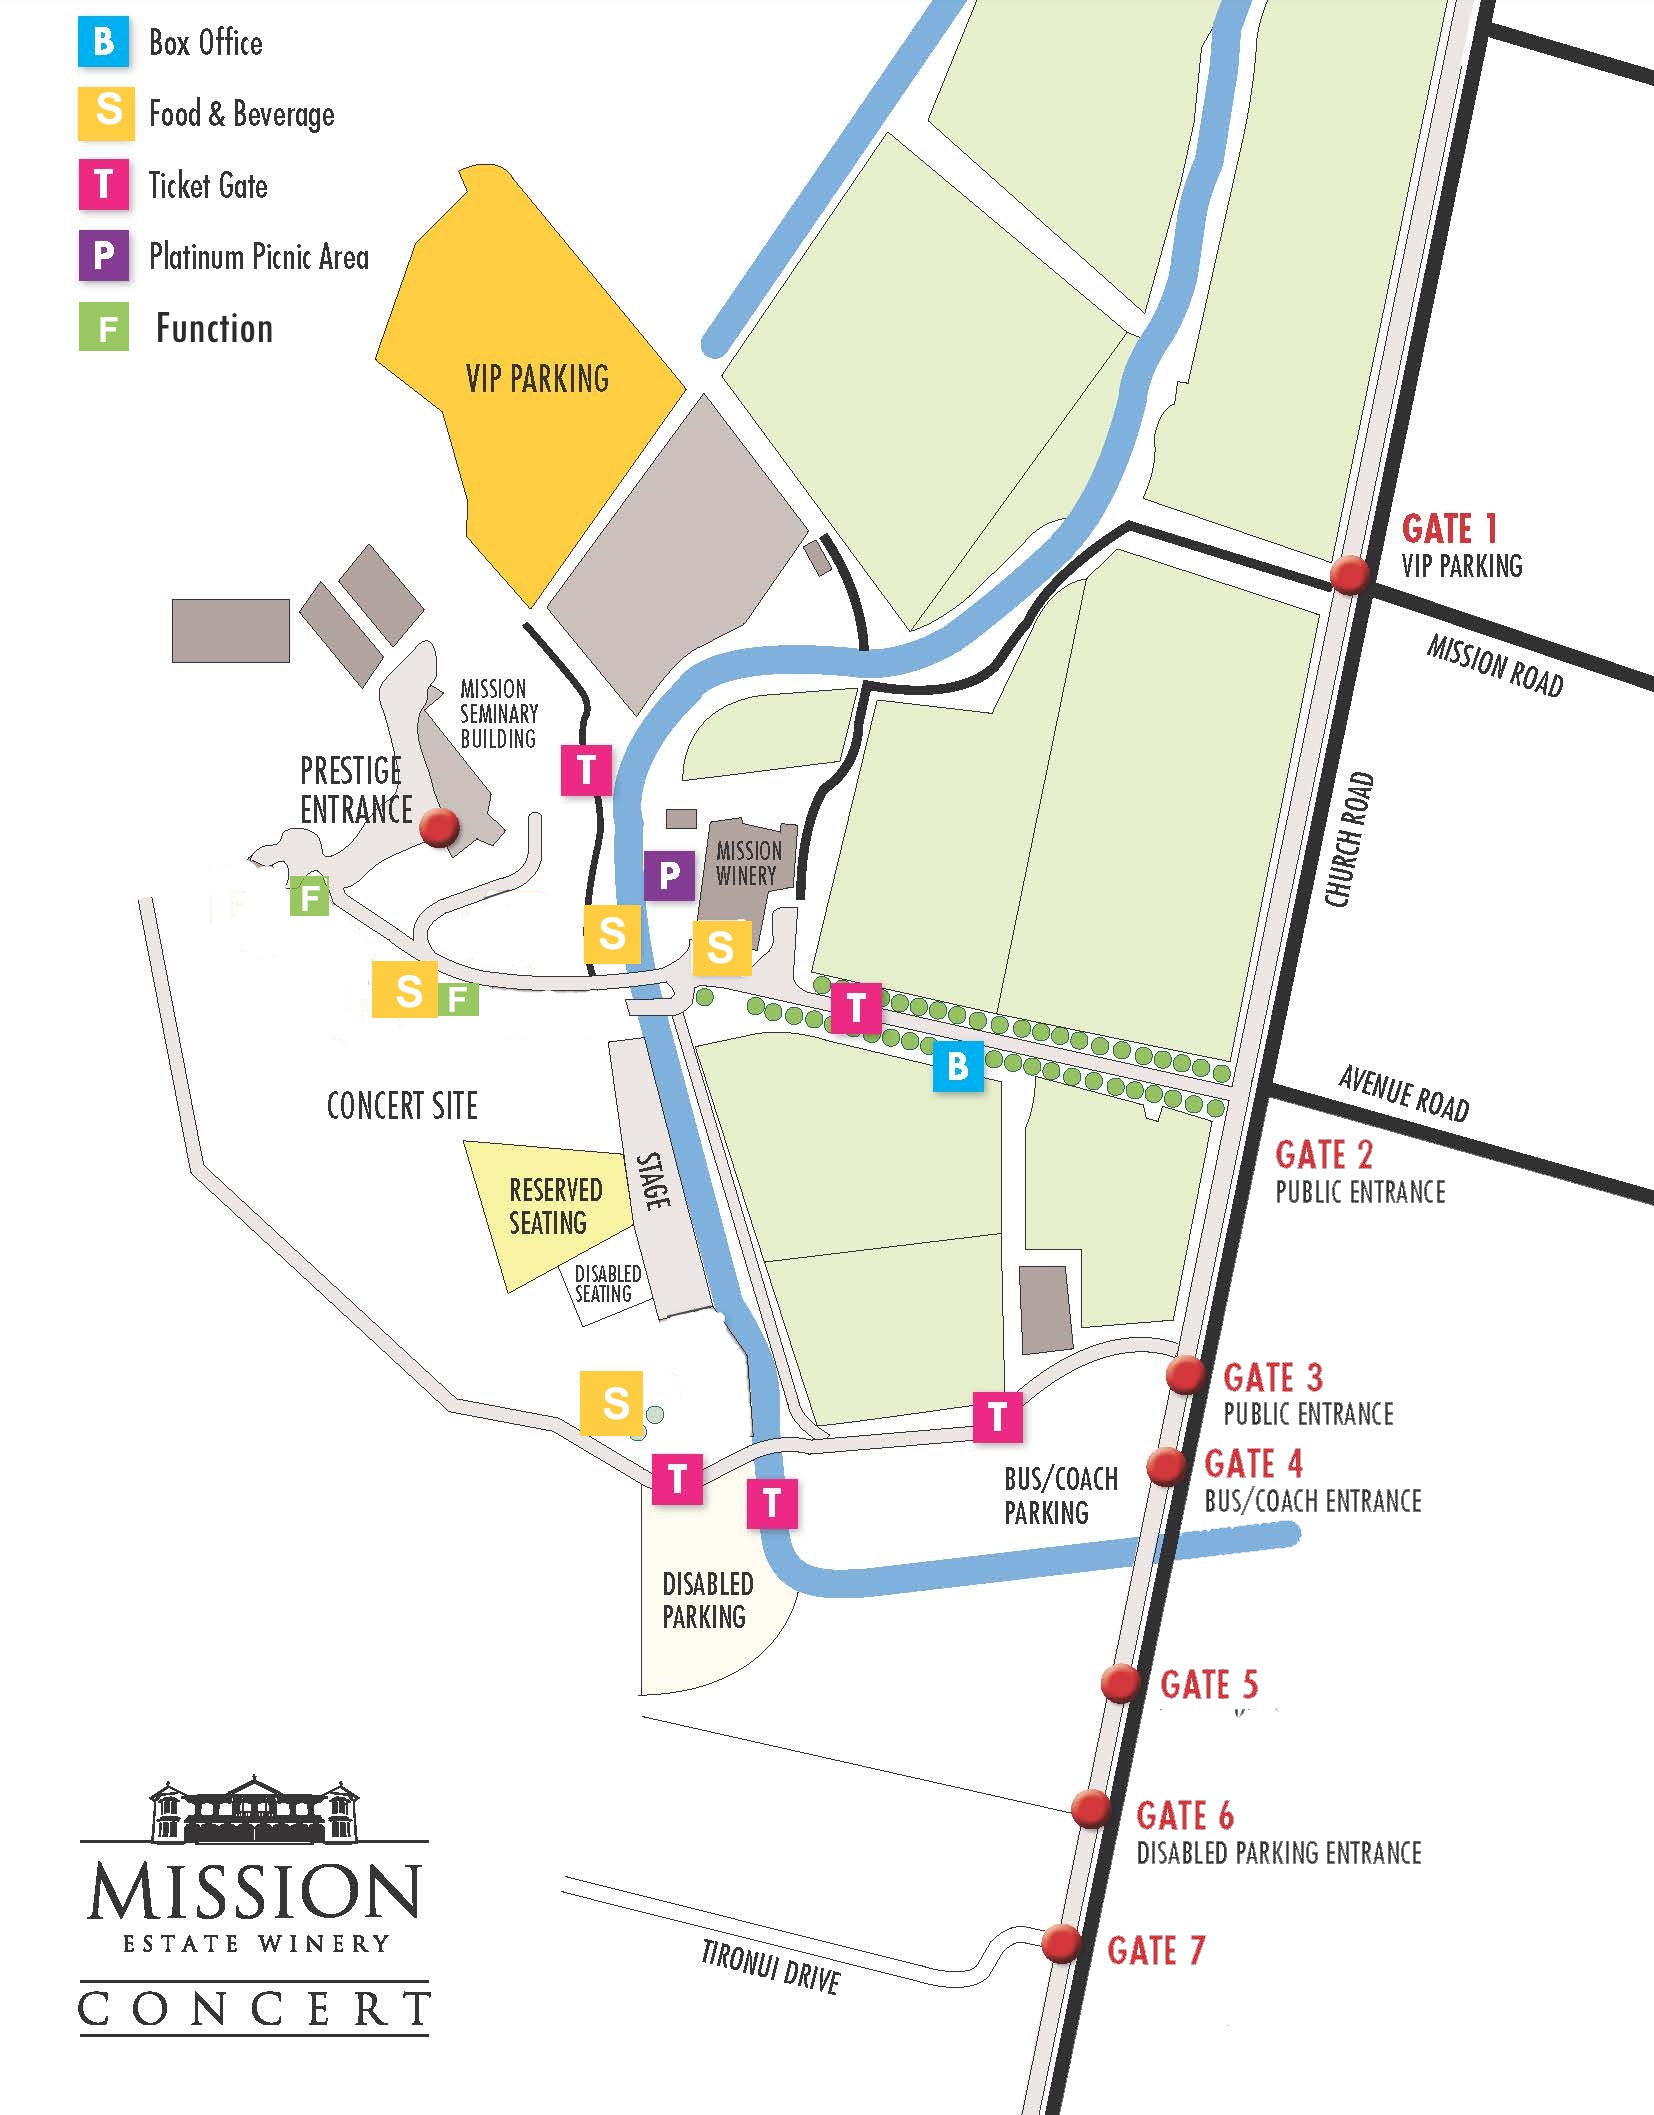 Mission Estate Winery Concert Maps